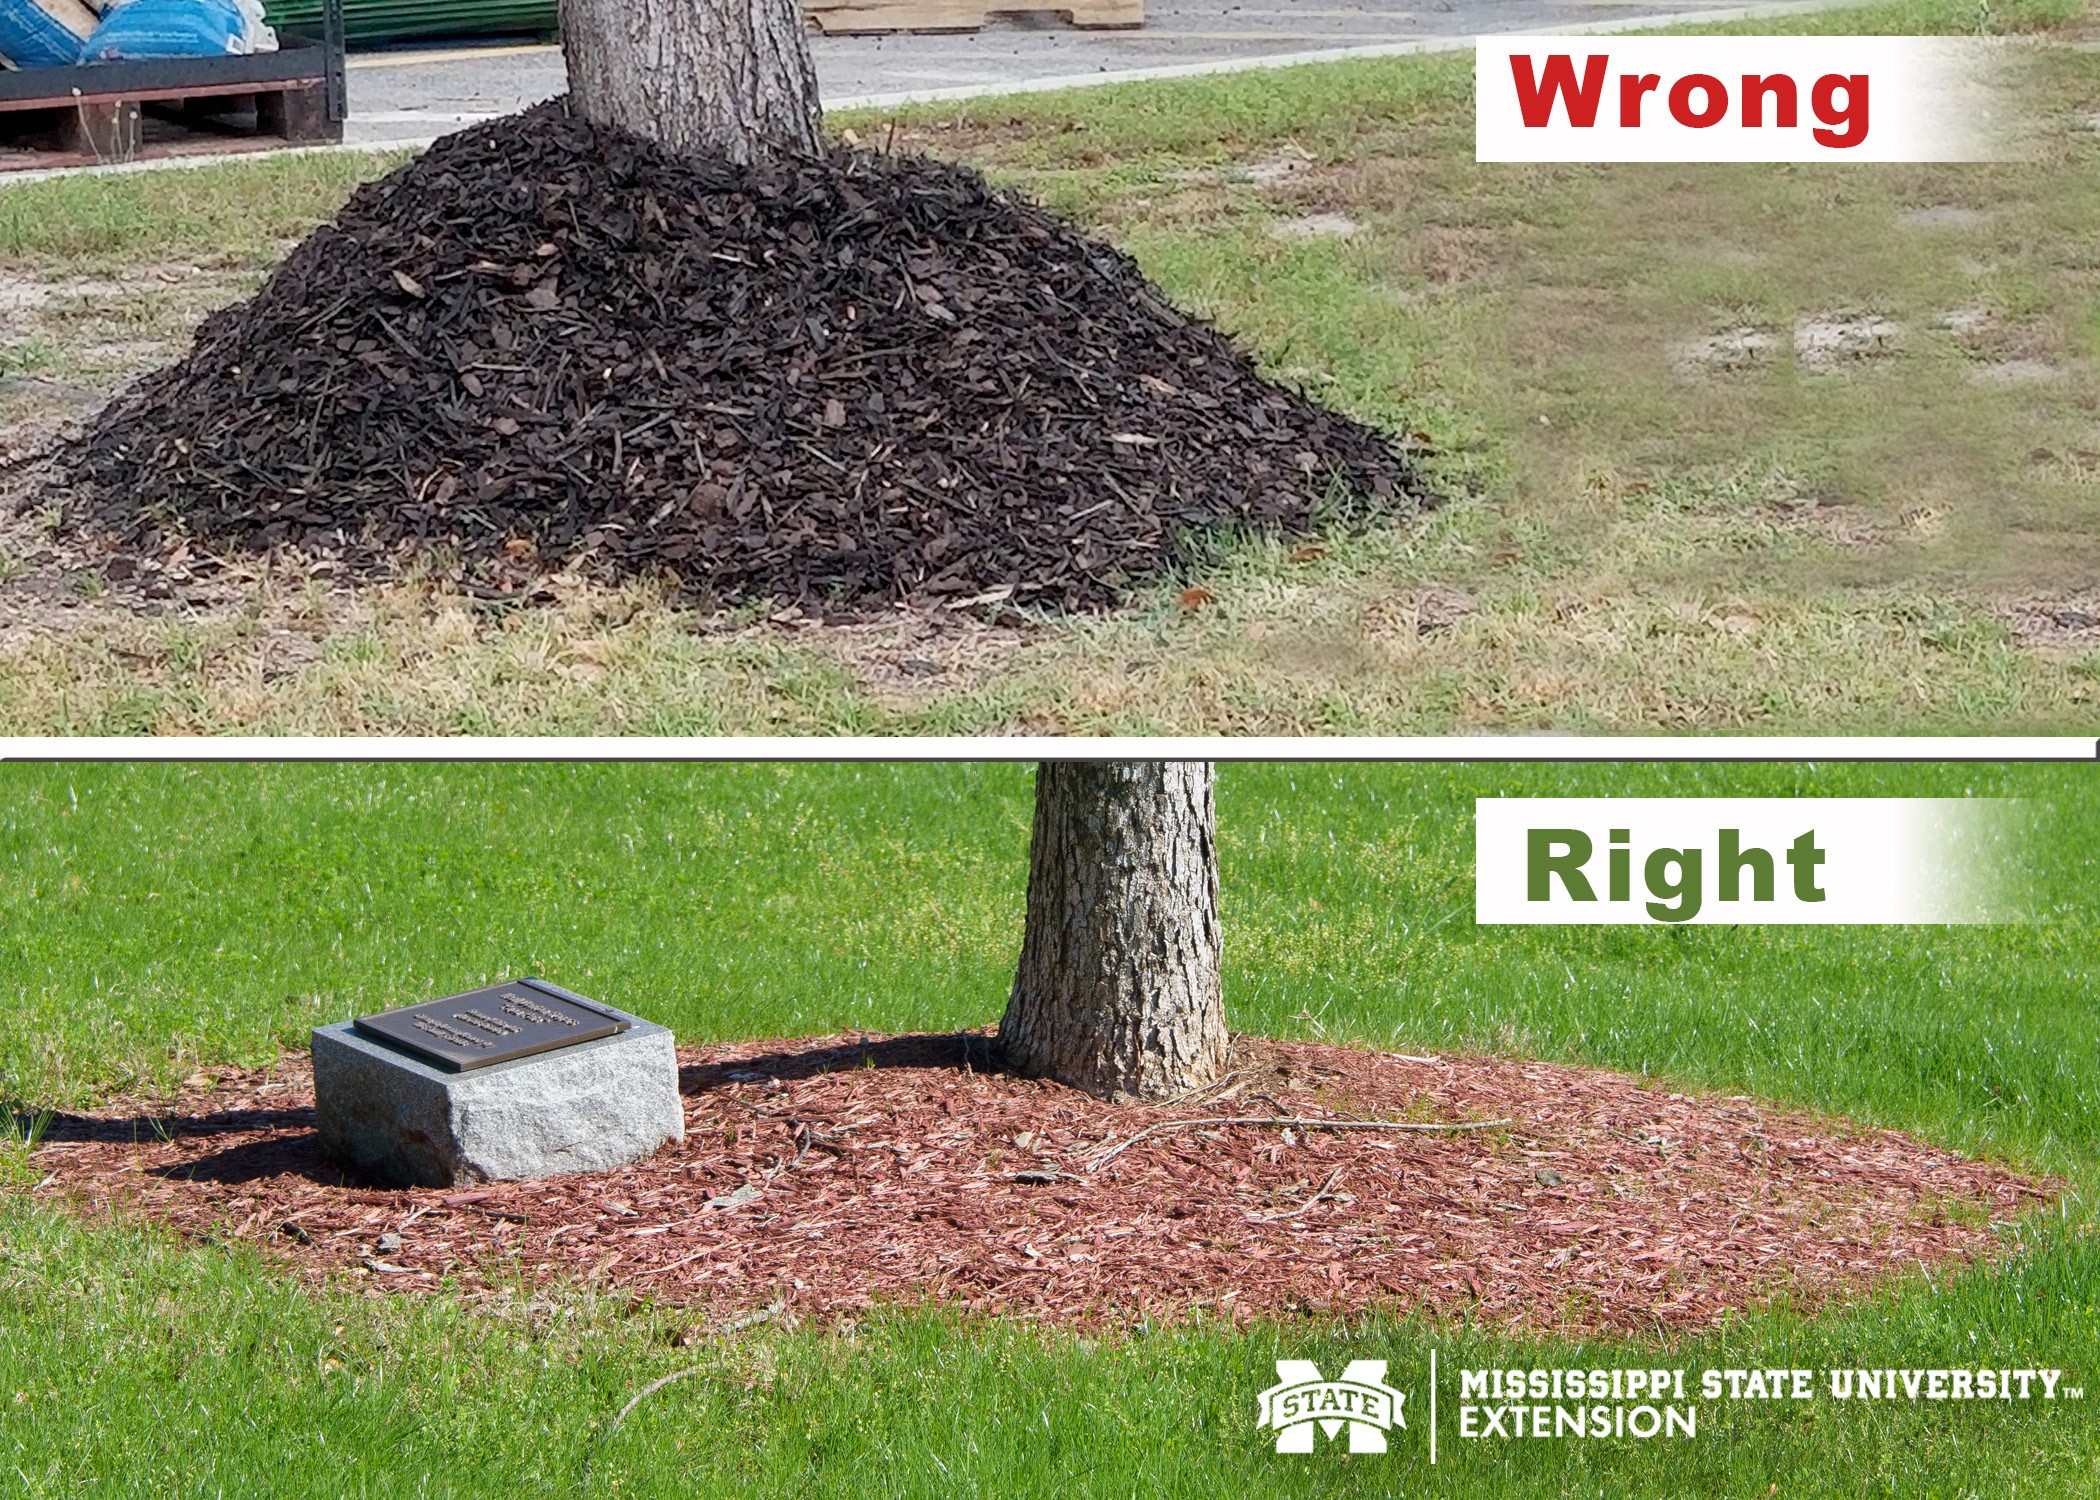 Side by side photos showing the right and wrong ways to mulch around a tree trunk. (Photos by Kevin Hudson and Gary Bachman)